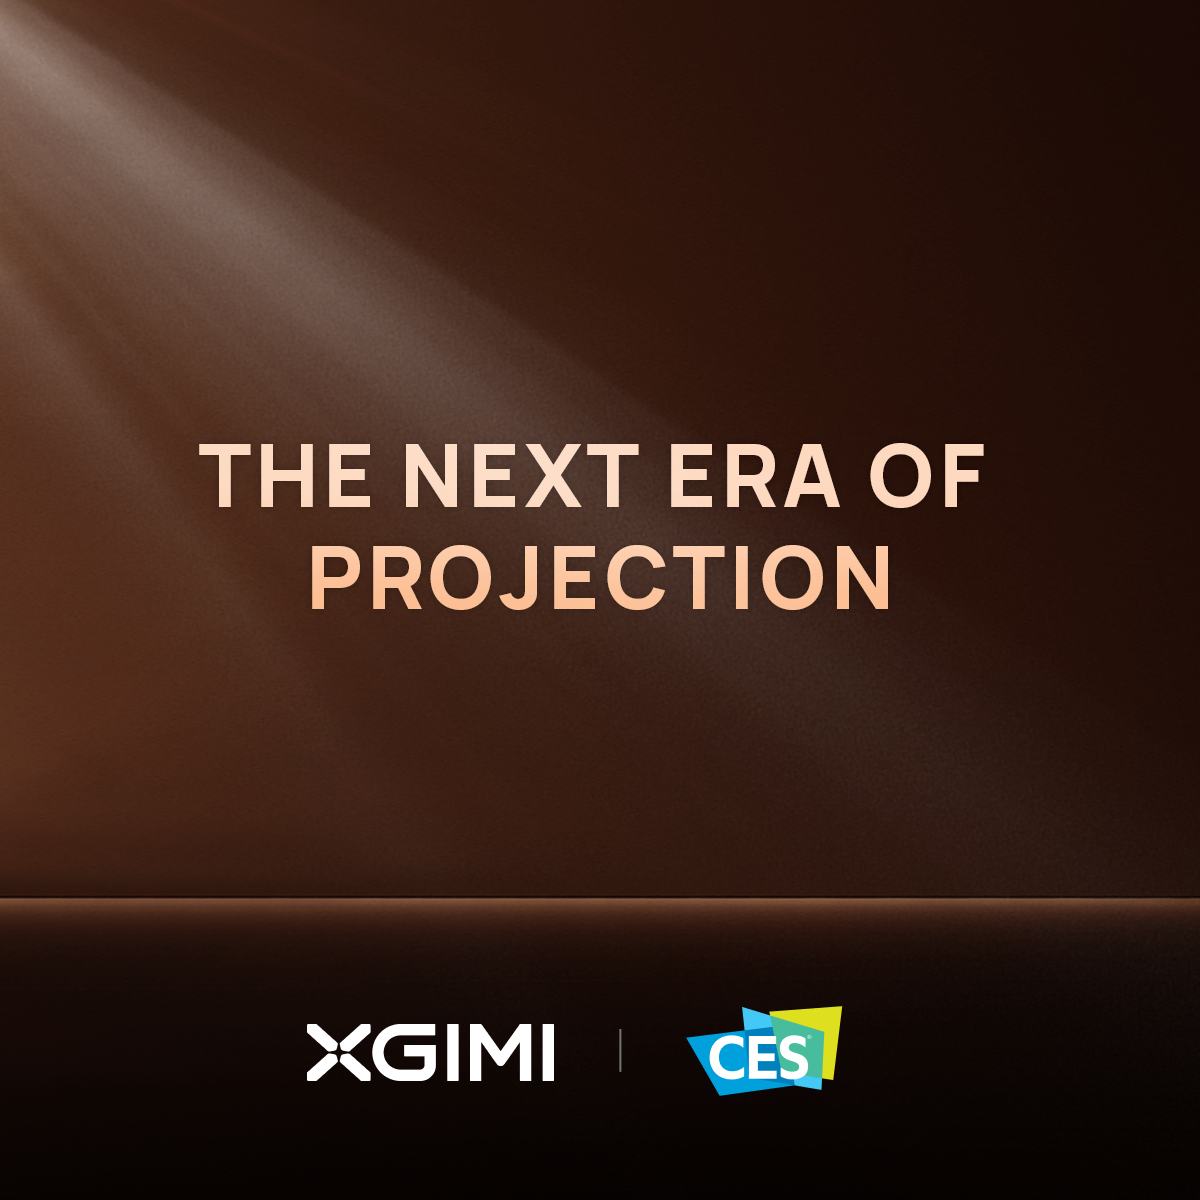 Explore the Latest Breakthrough of Projecting Tech at XGIMI's CES Showcase!